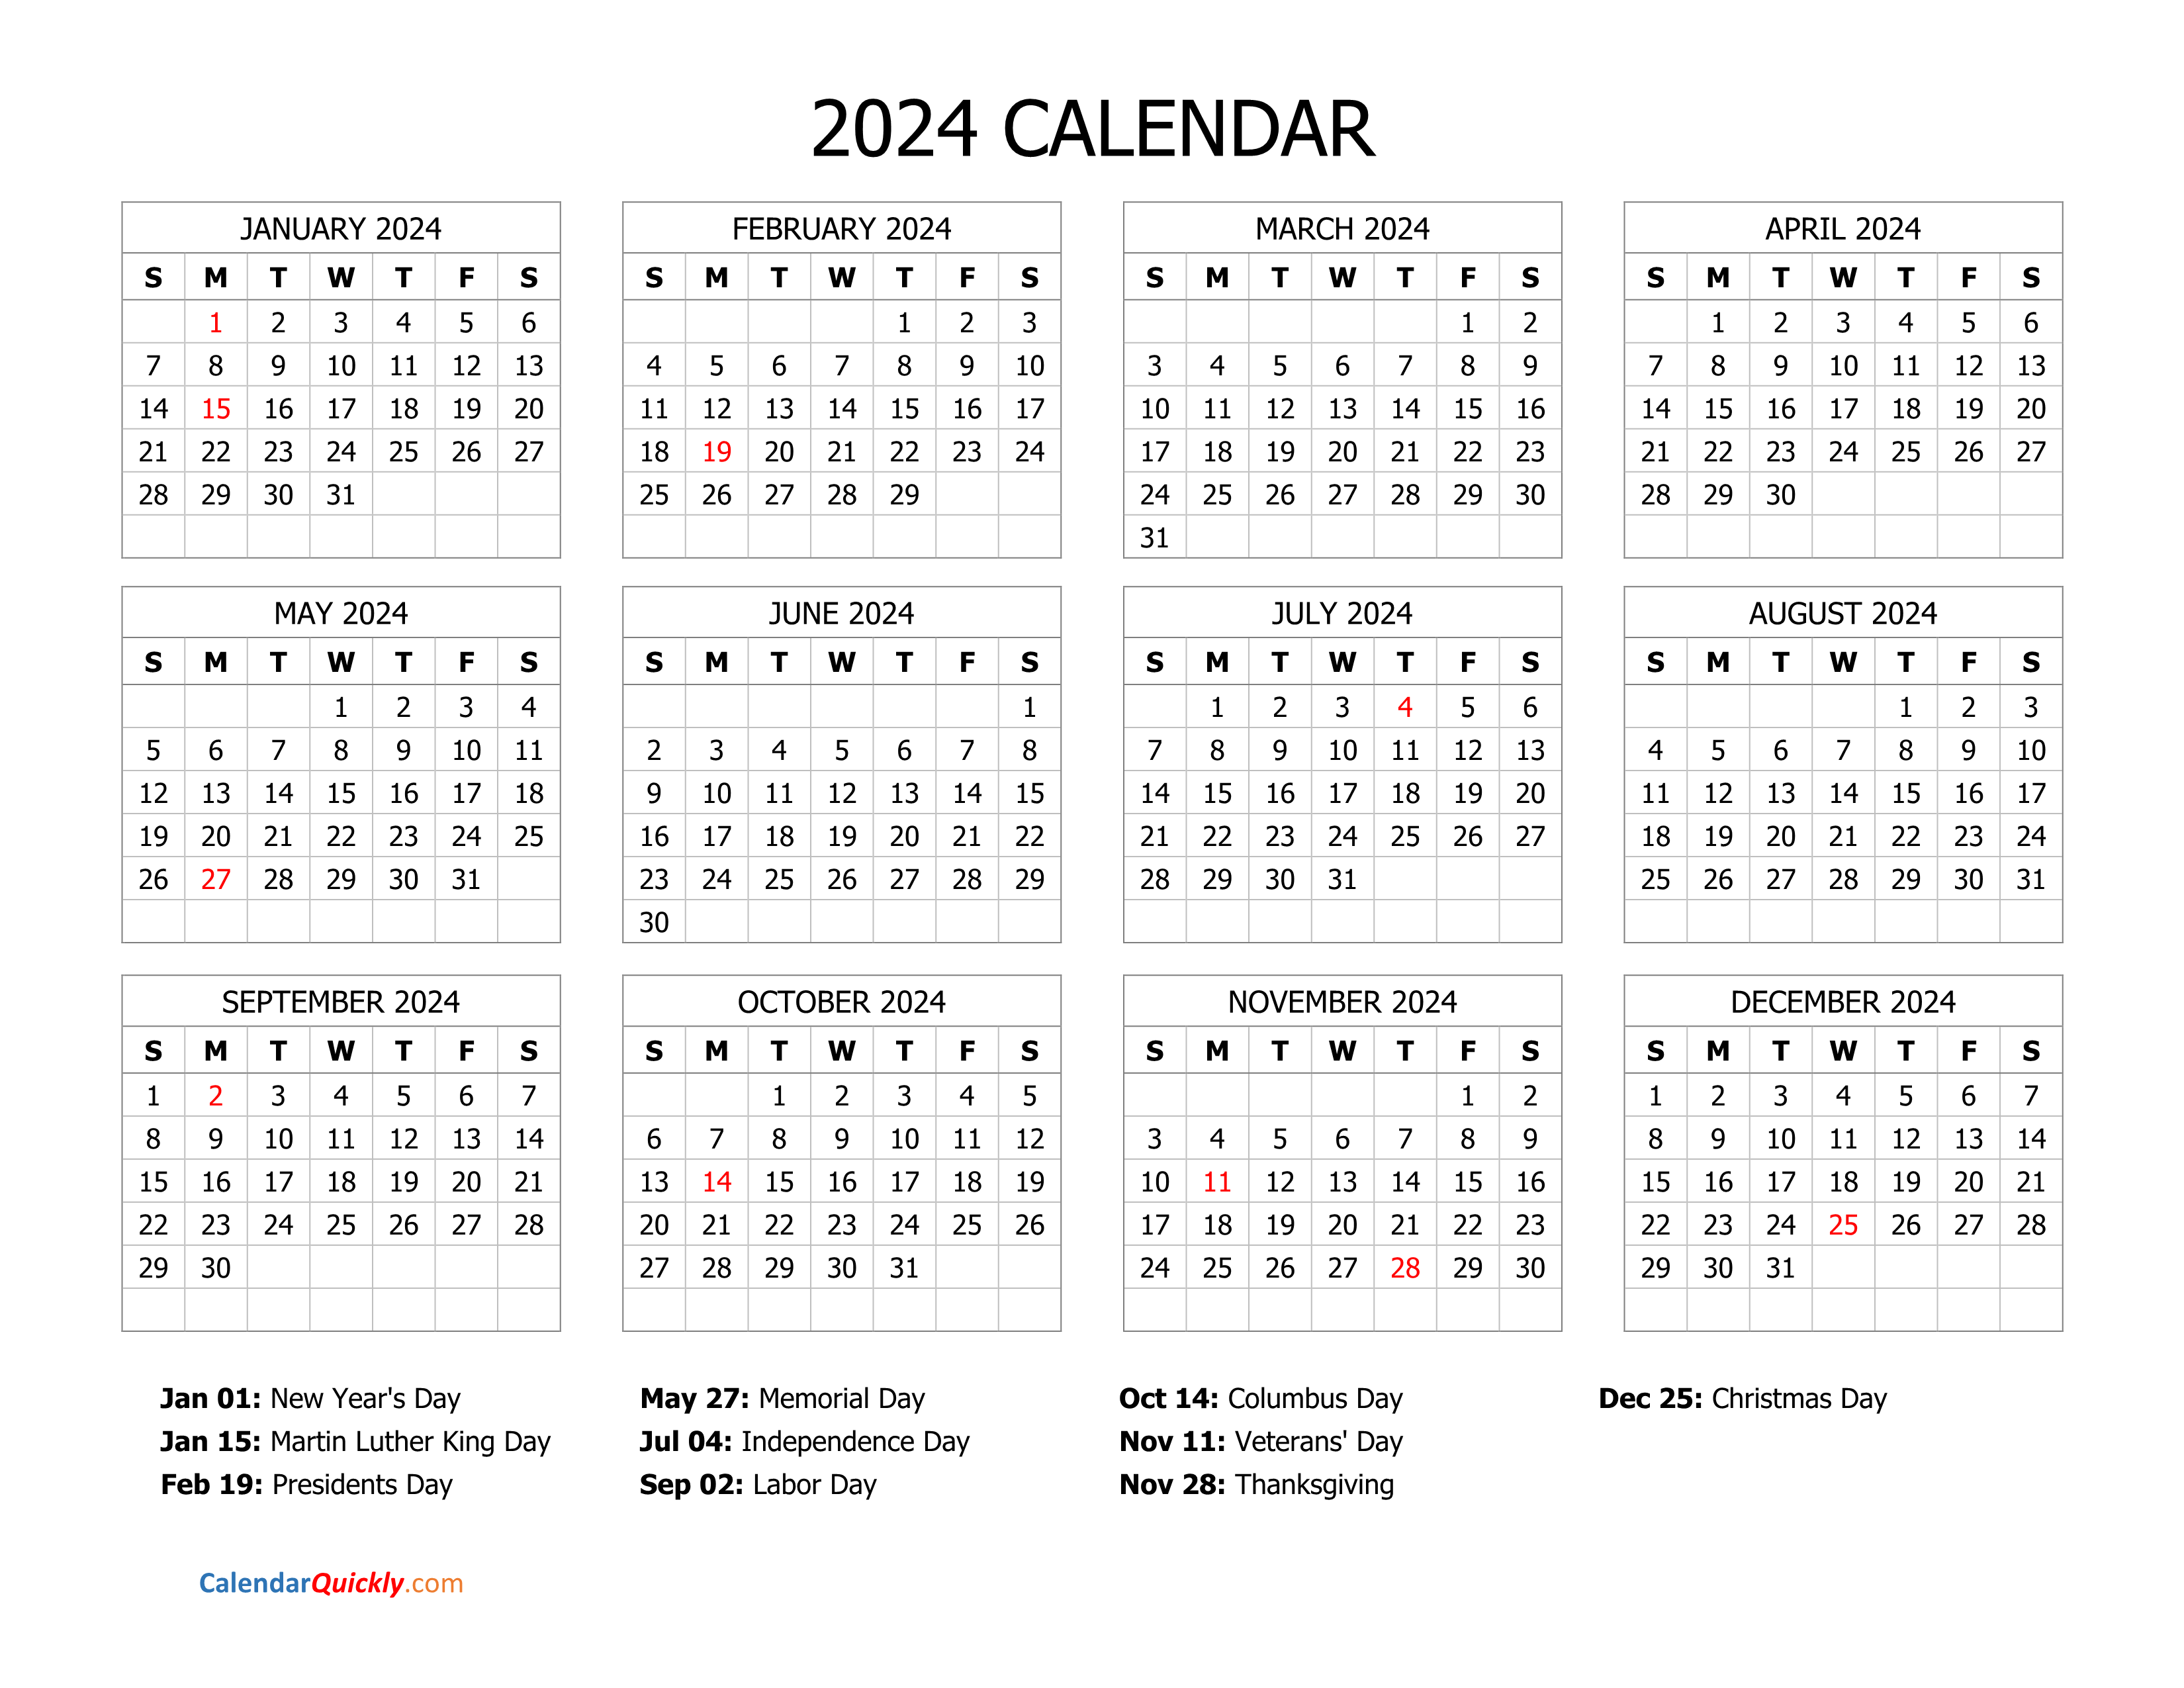 2024 Calendar Free Printable - Free Printable 2024 Calendar With Holidays Monthly Vertical